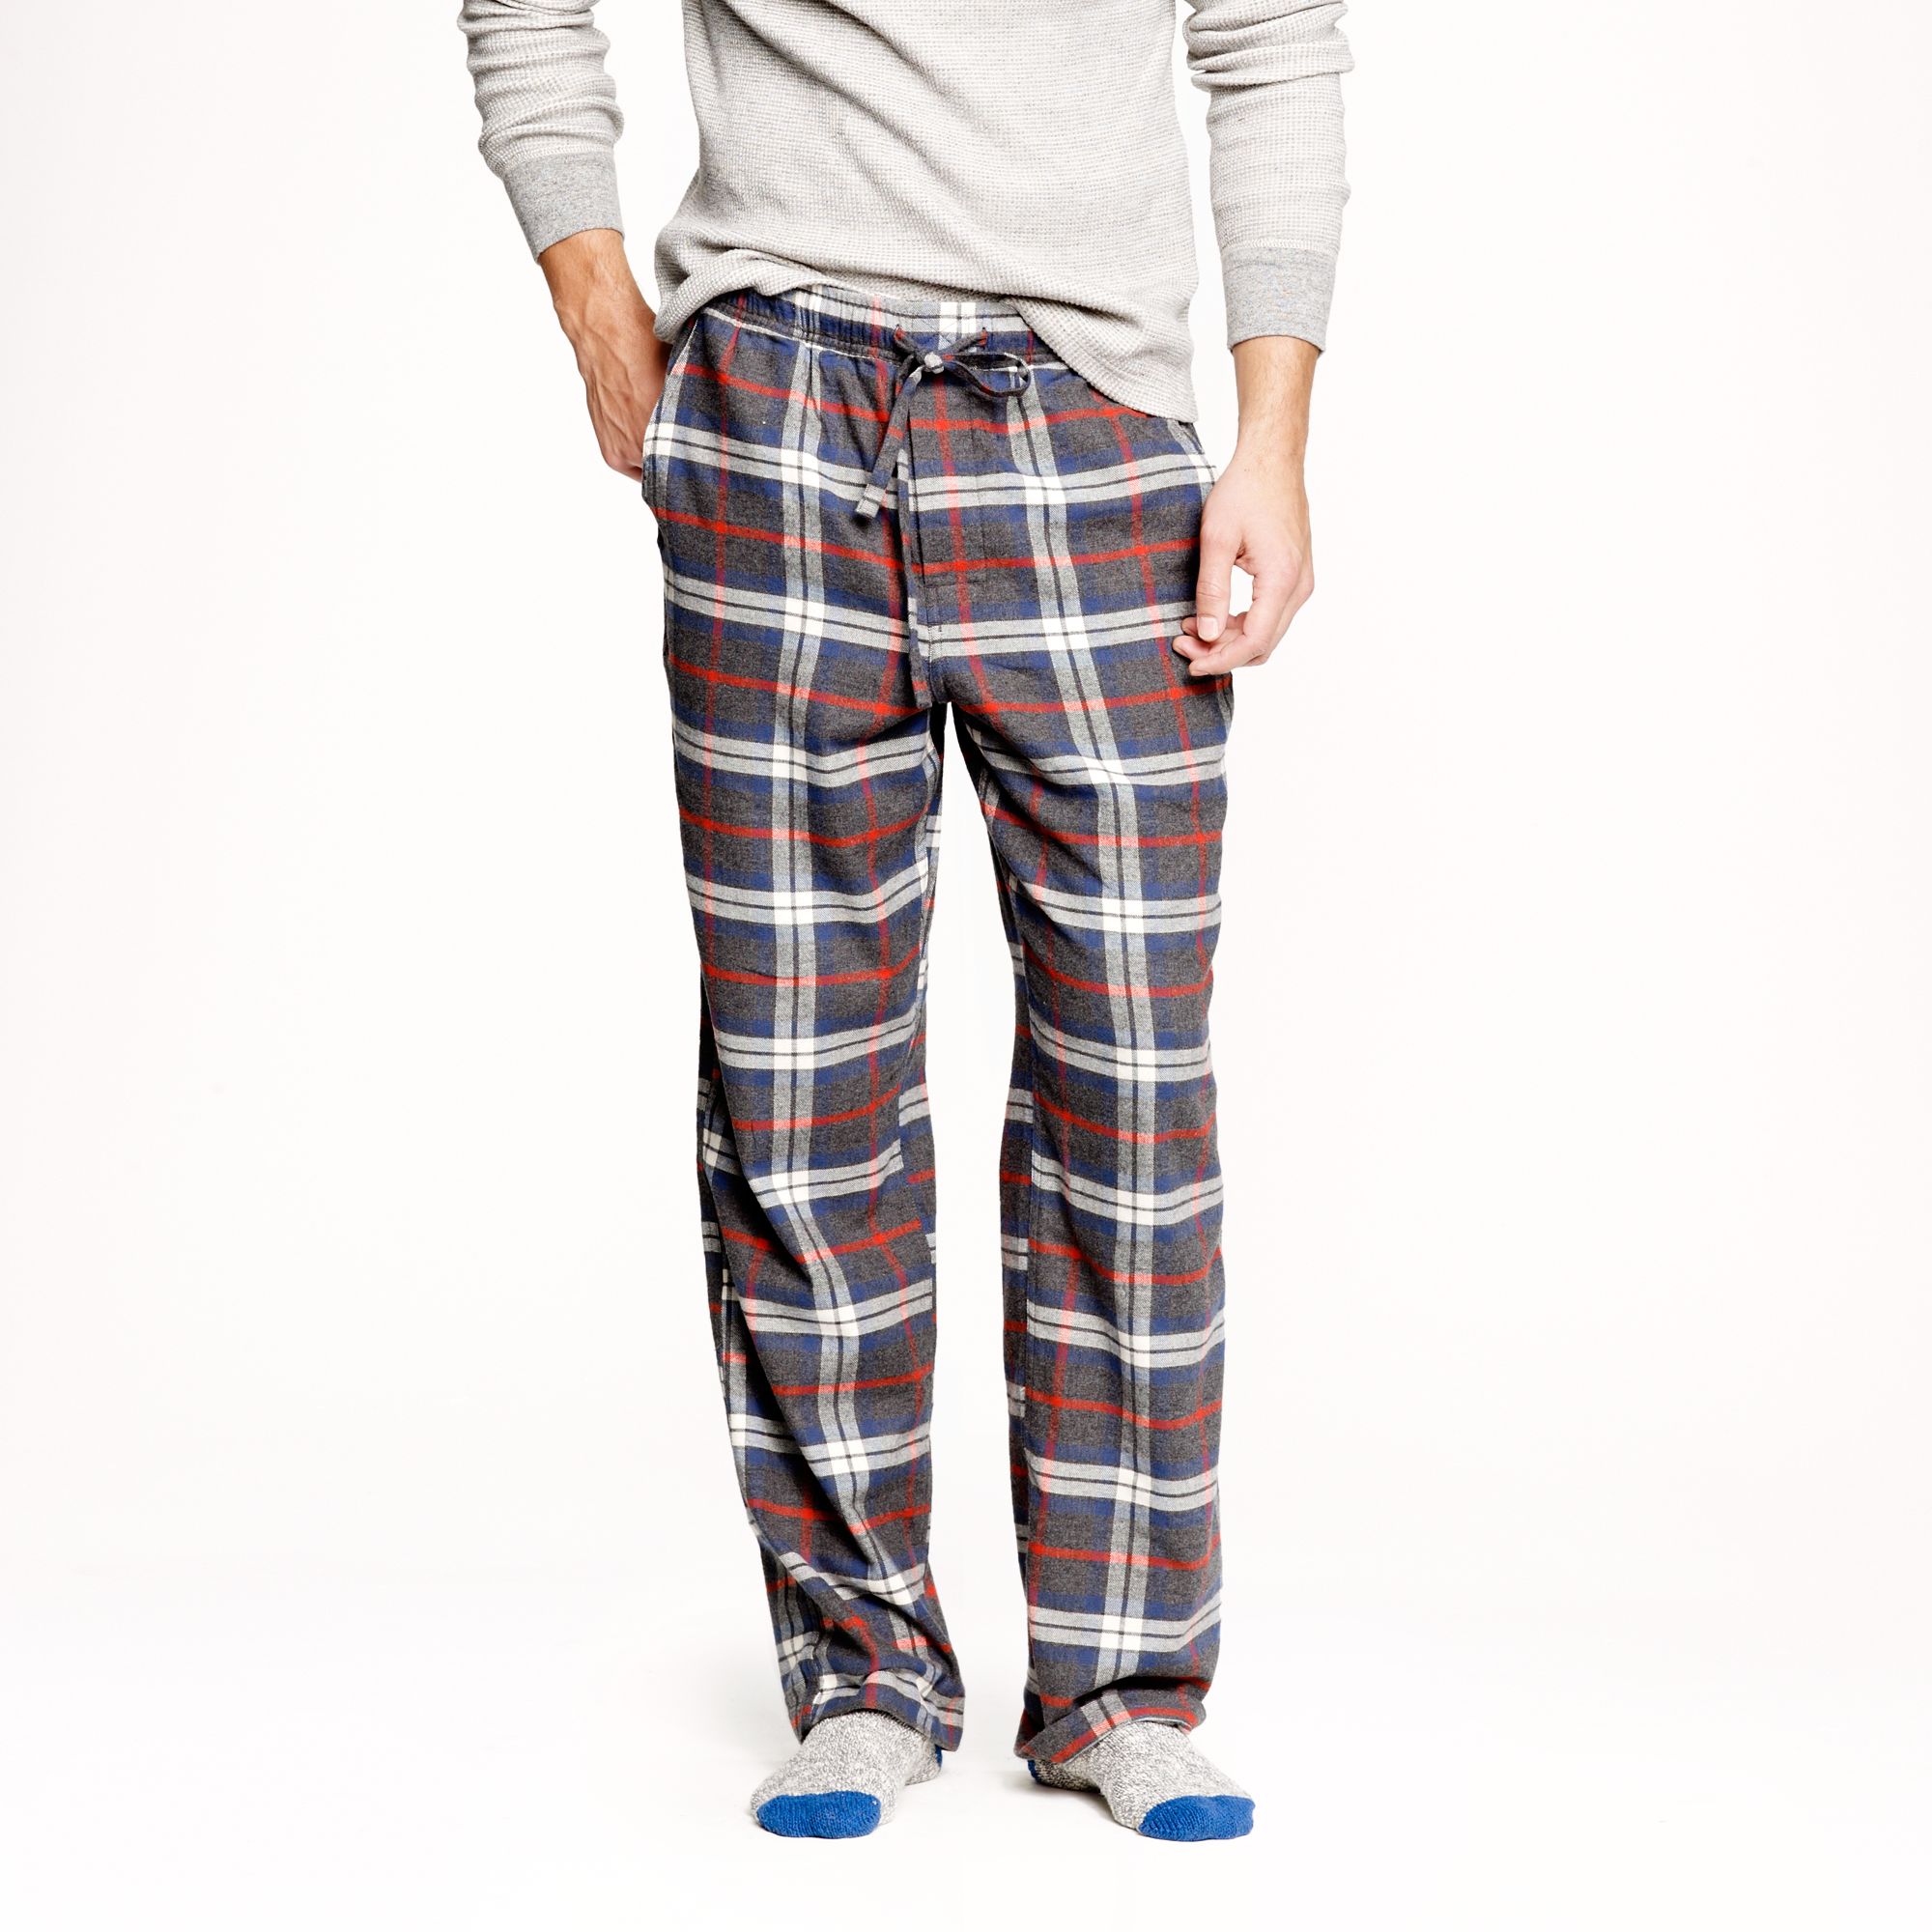 J.crew Classic Flannel Pajama Pant in Gunsmith Grey Plaid in Multicolor ...